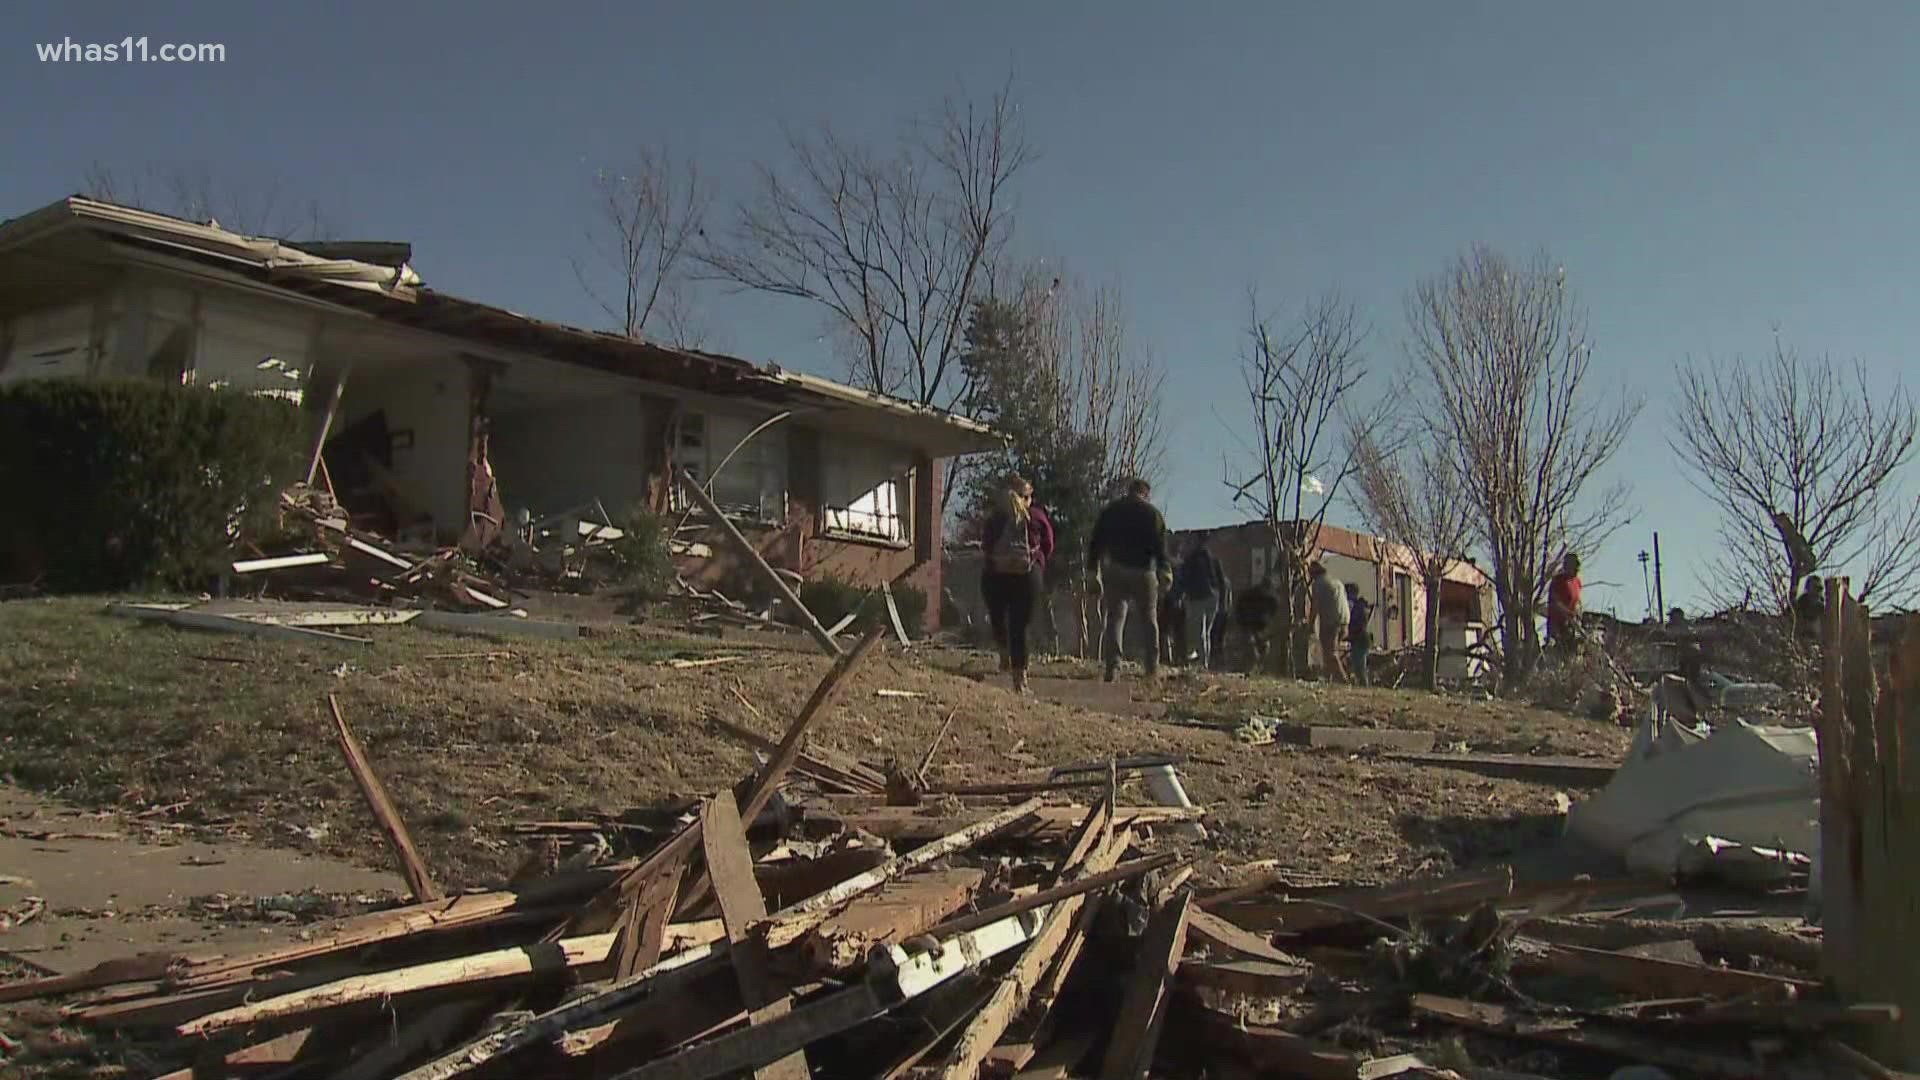 Families who lost everything during Friday night's tornado are starting to pick up the pieces.